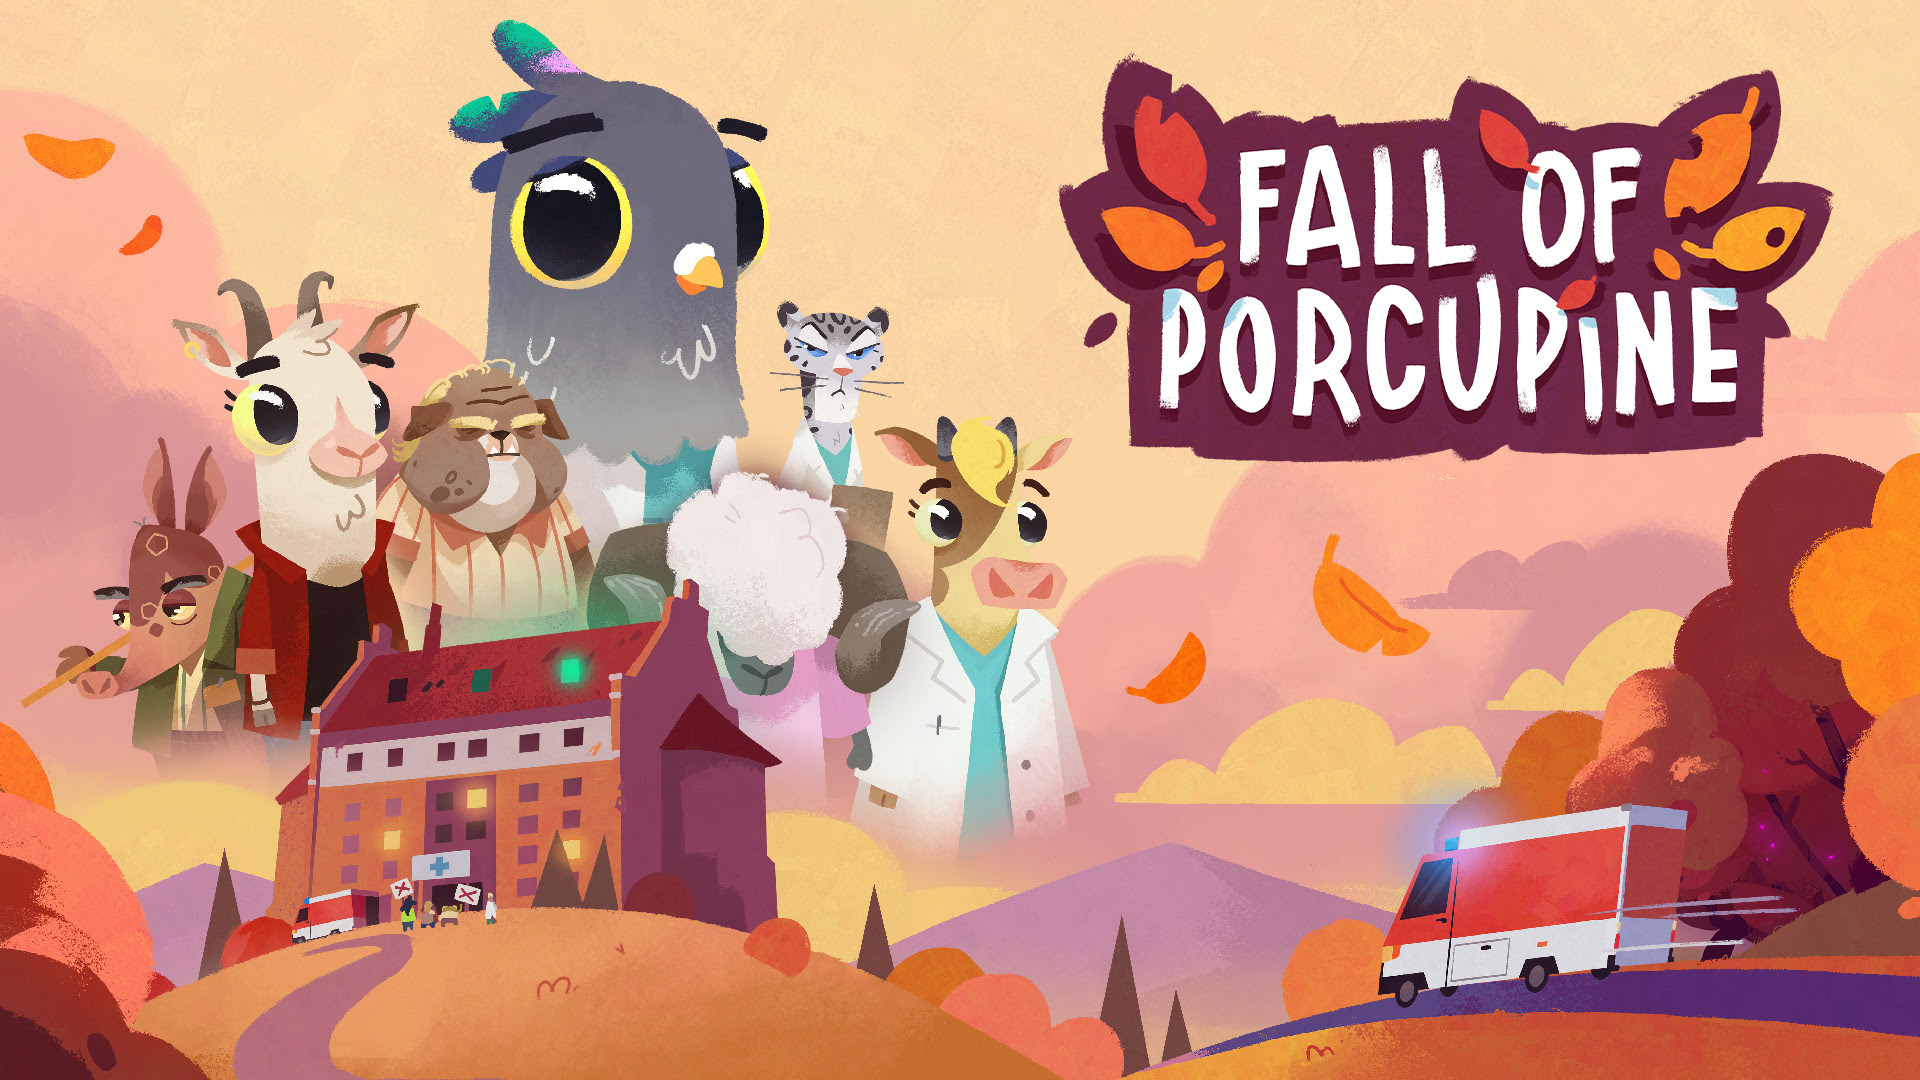 Celebrate Life’s Small Wins and Learn Self-Care in Fall of Porcupine, a Wholesome Narrative Adventure from Assemble Entertainment — Now Available on PC and Consoles 